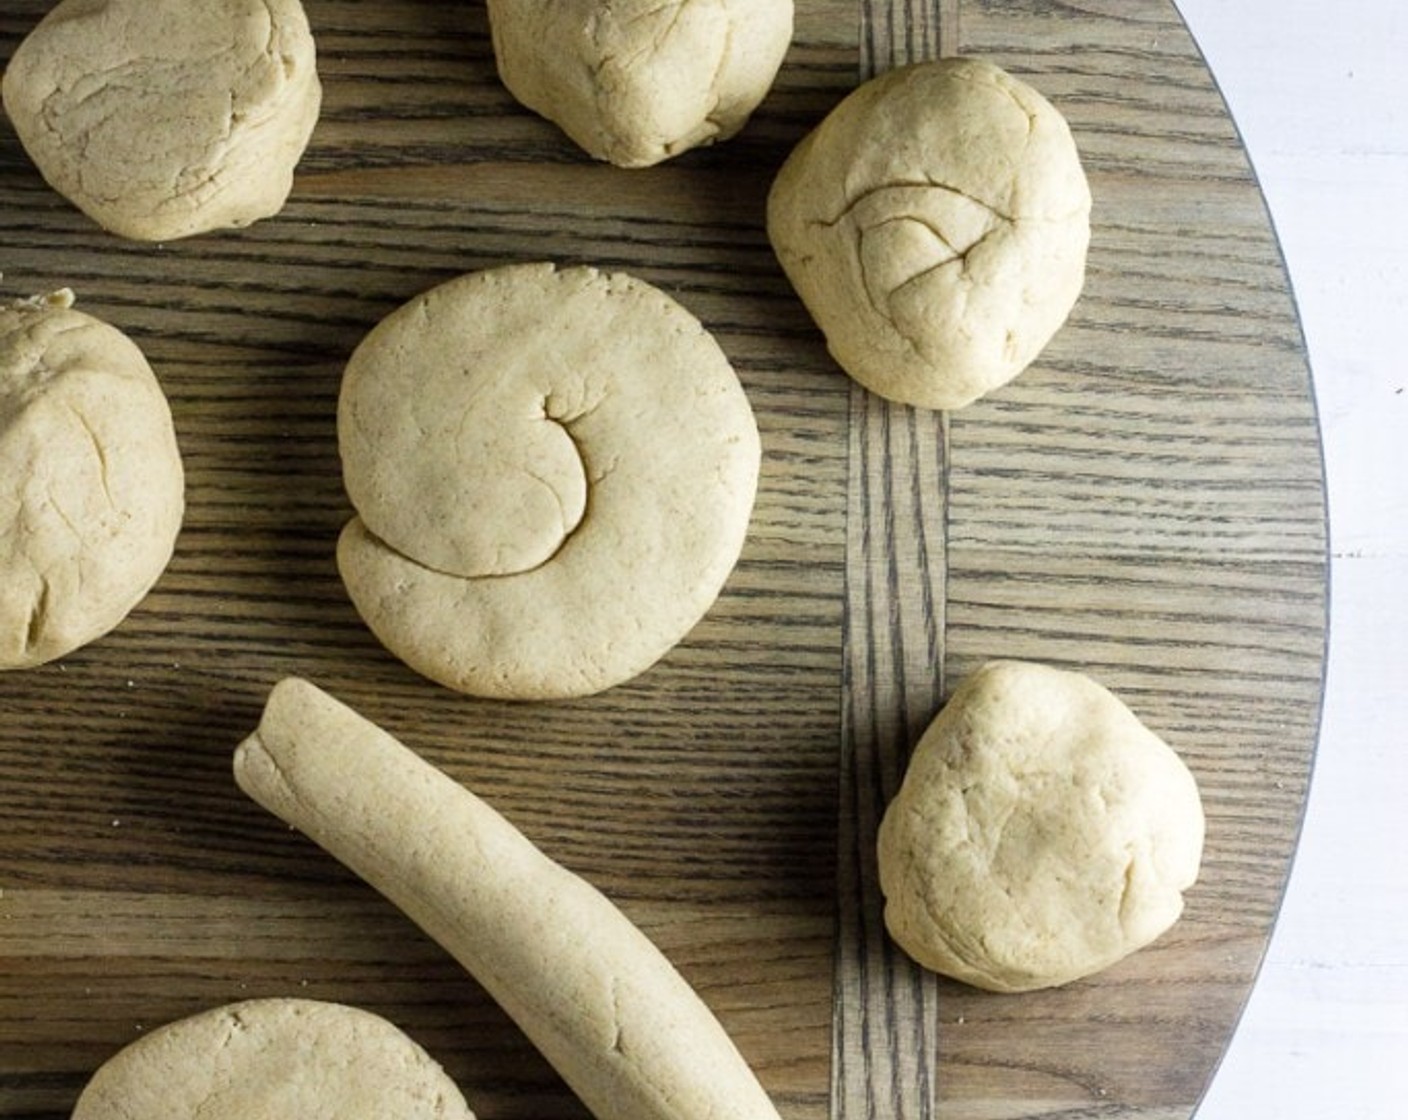 step 7 Divide dough evenly into 12 portions. Roll each portion into a cylinder about 7 inches long. Shape each cylinder into a gentle spiral and press evenly until about 4 inches in diameter.